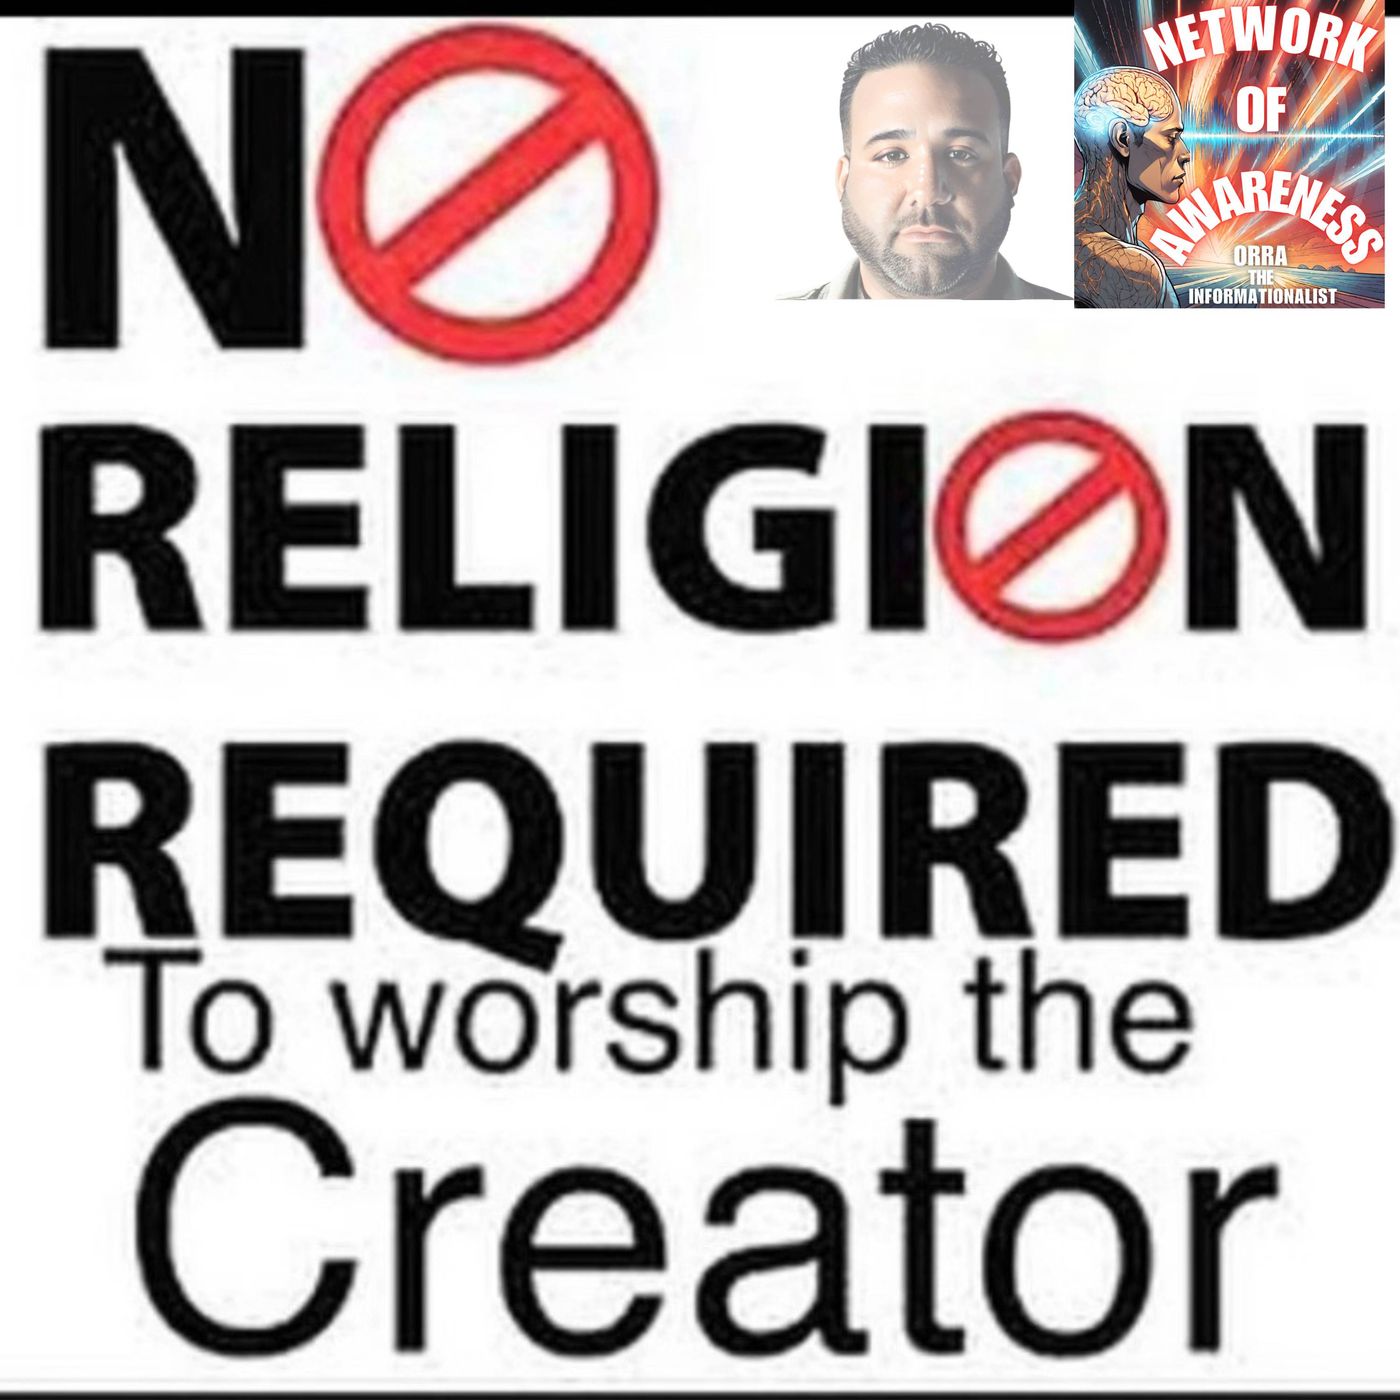 "N0 Religion Required to Worship the Creator"